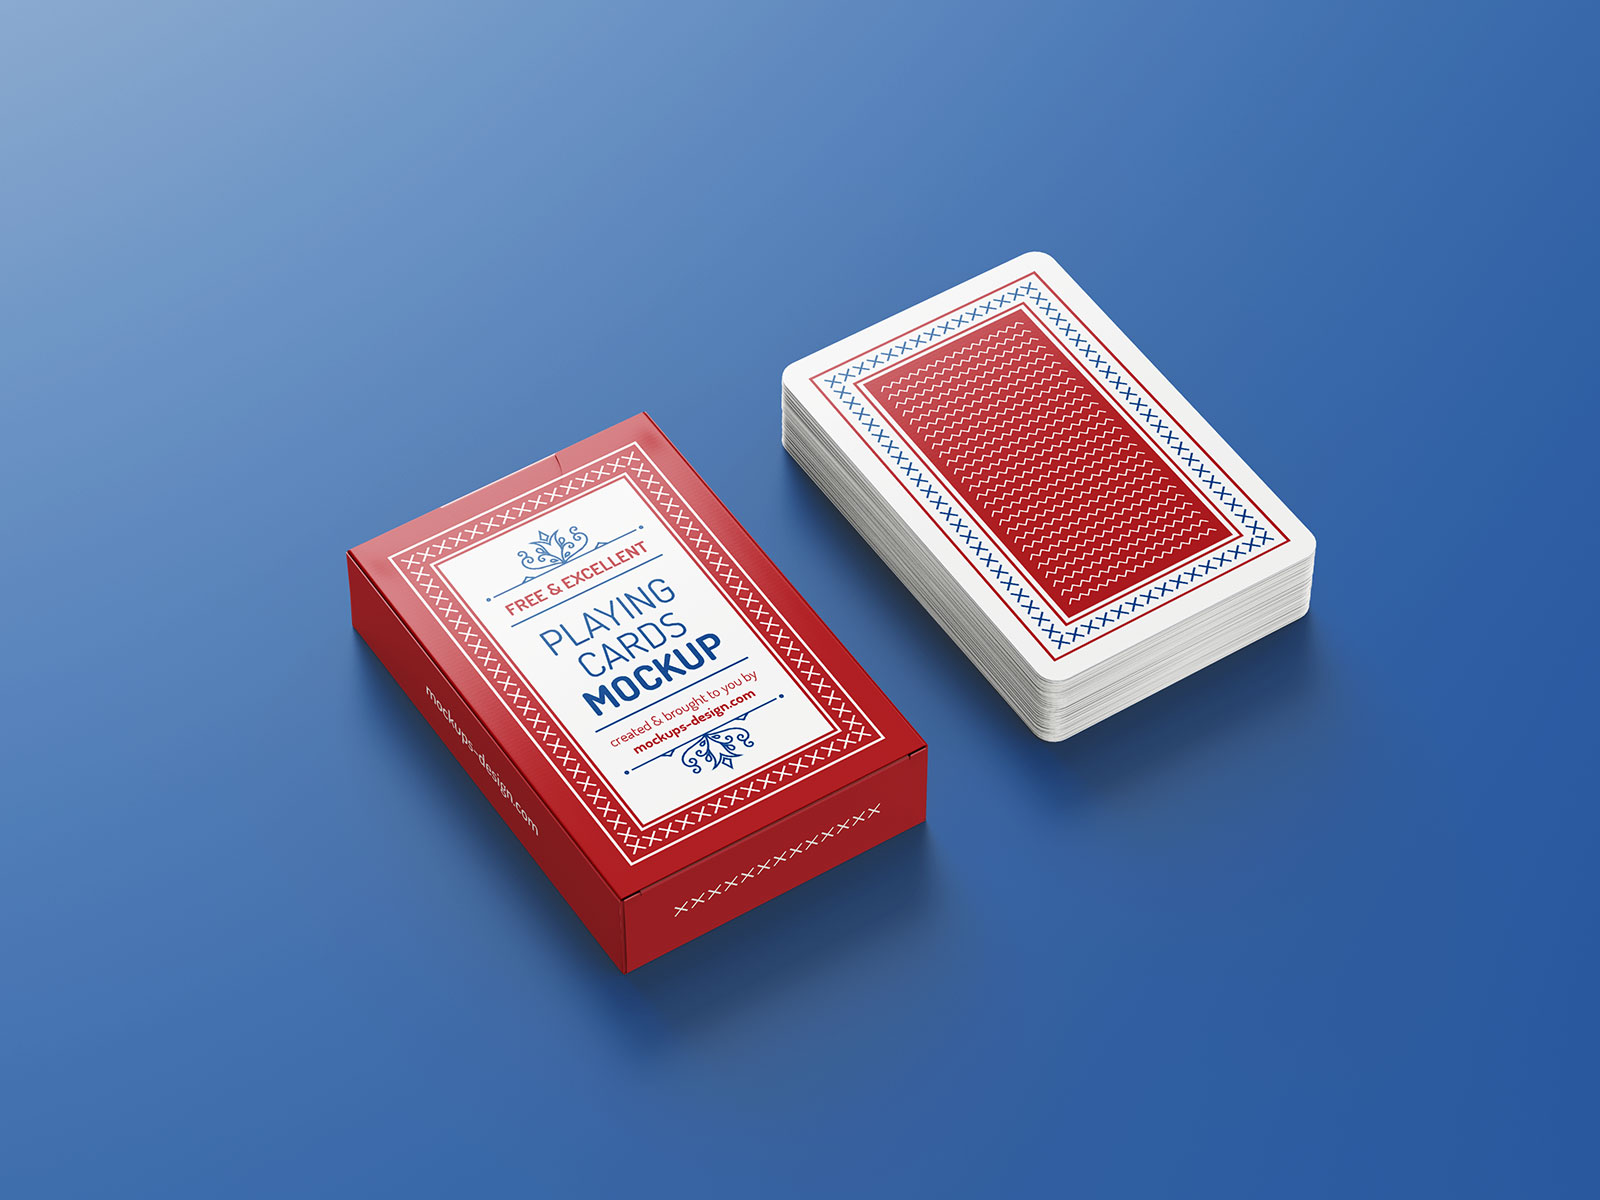 Free Playing Card Deck & Packaging Mockup PSD (1)